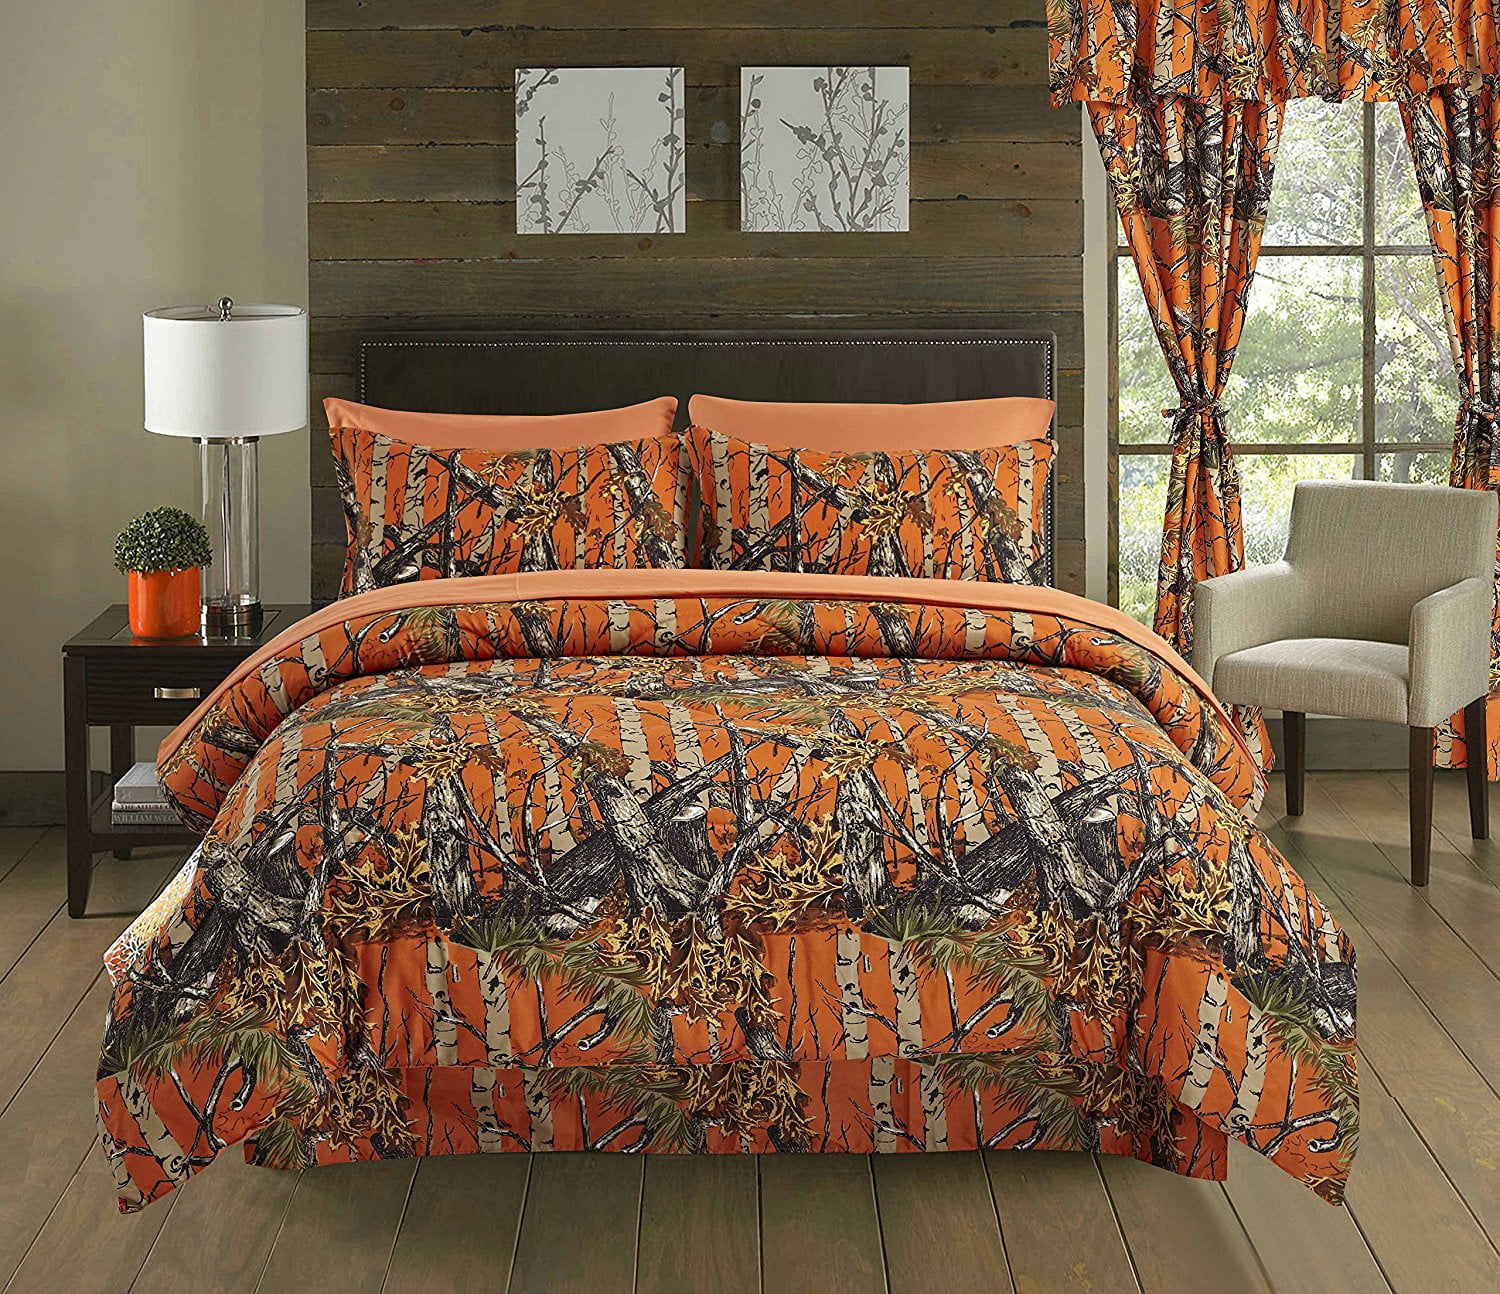 ORANGE Woods Hunter Camo Microfiber Camouflage Sheets Bed Sheet in Set all Sizes 